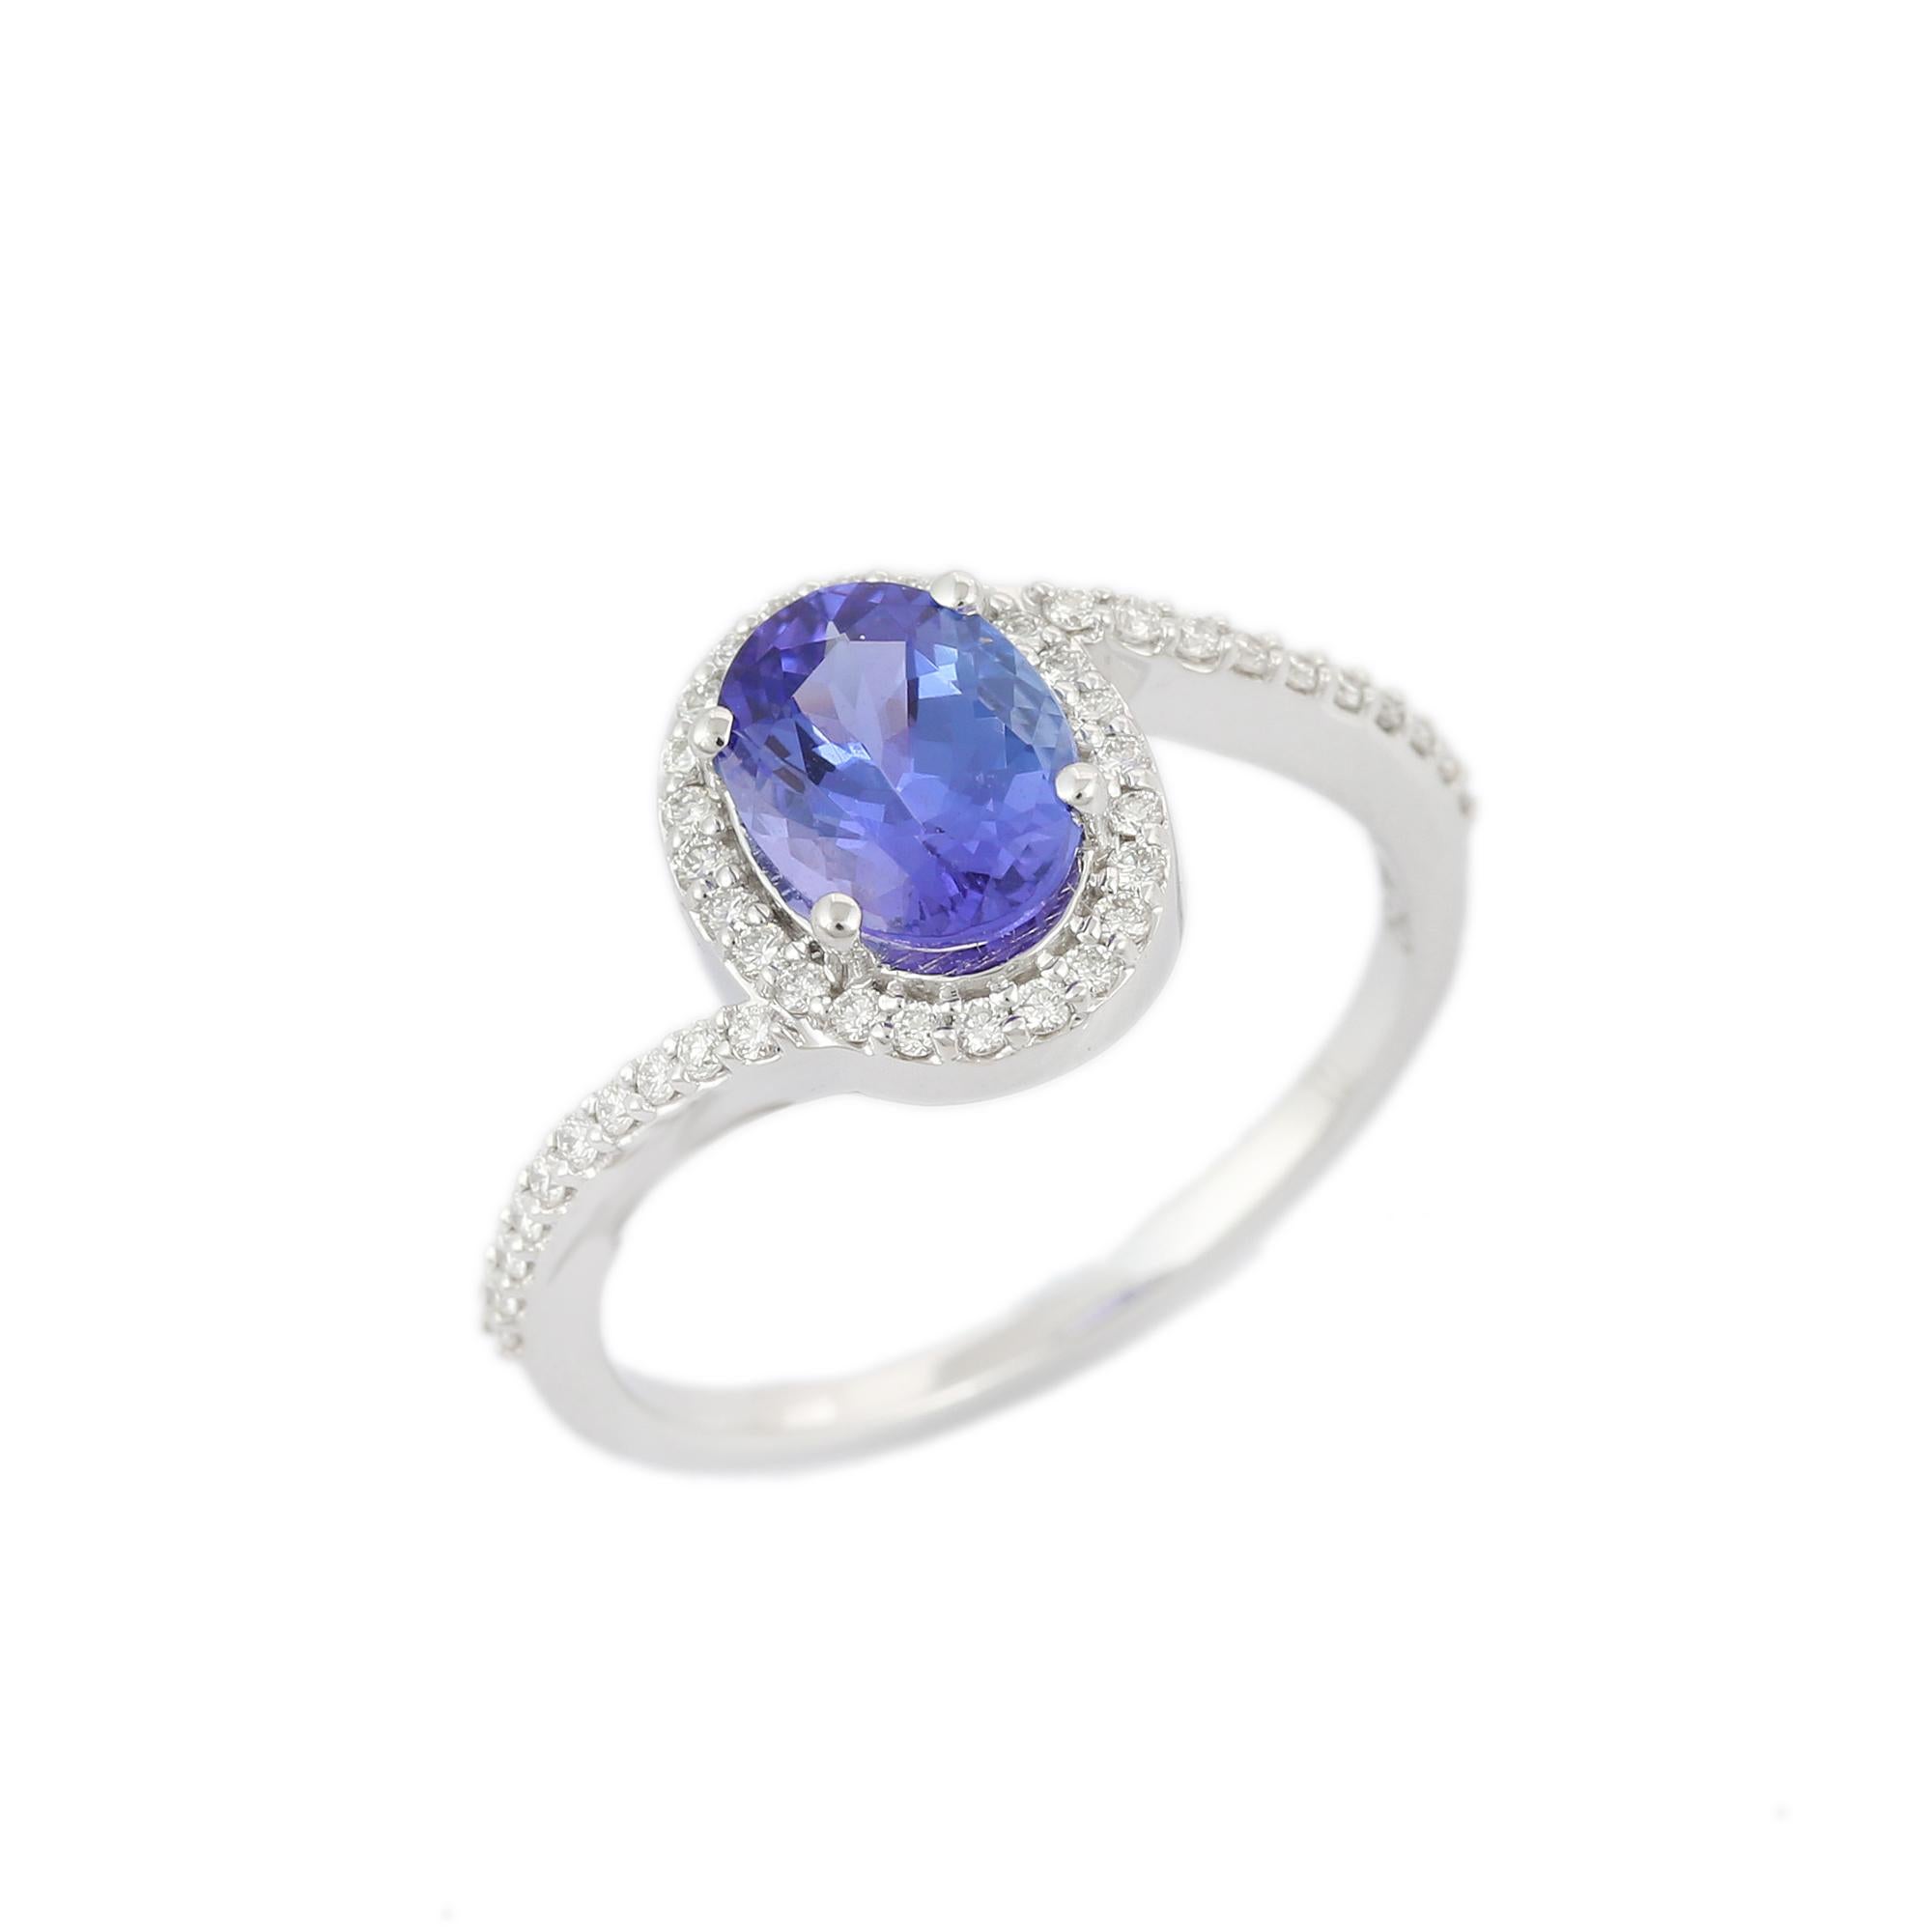 For Sale:  Diamond Ring with Tanzanite in 18K White Gold 5